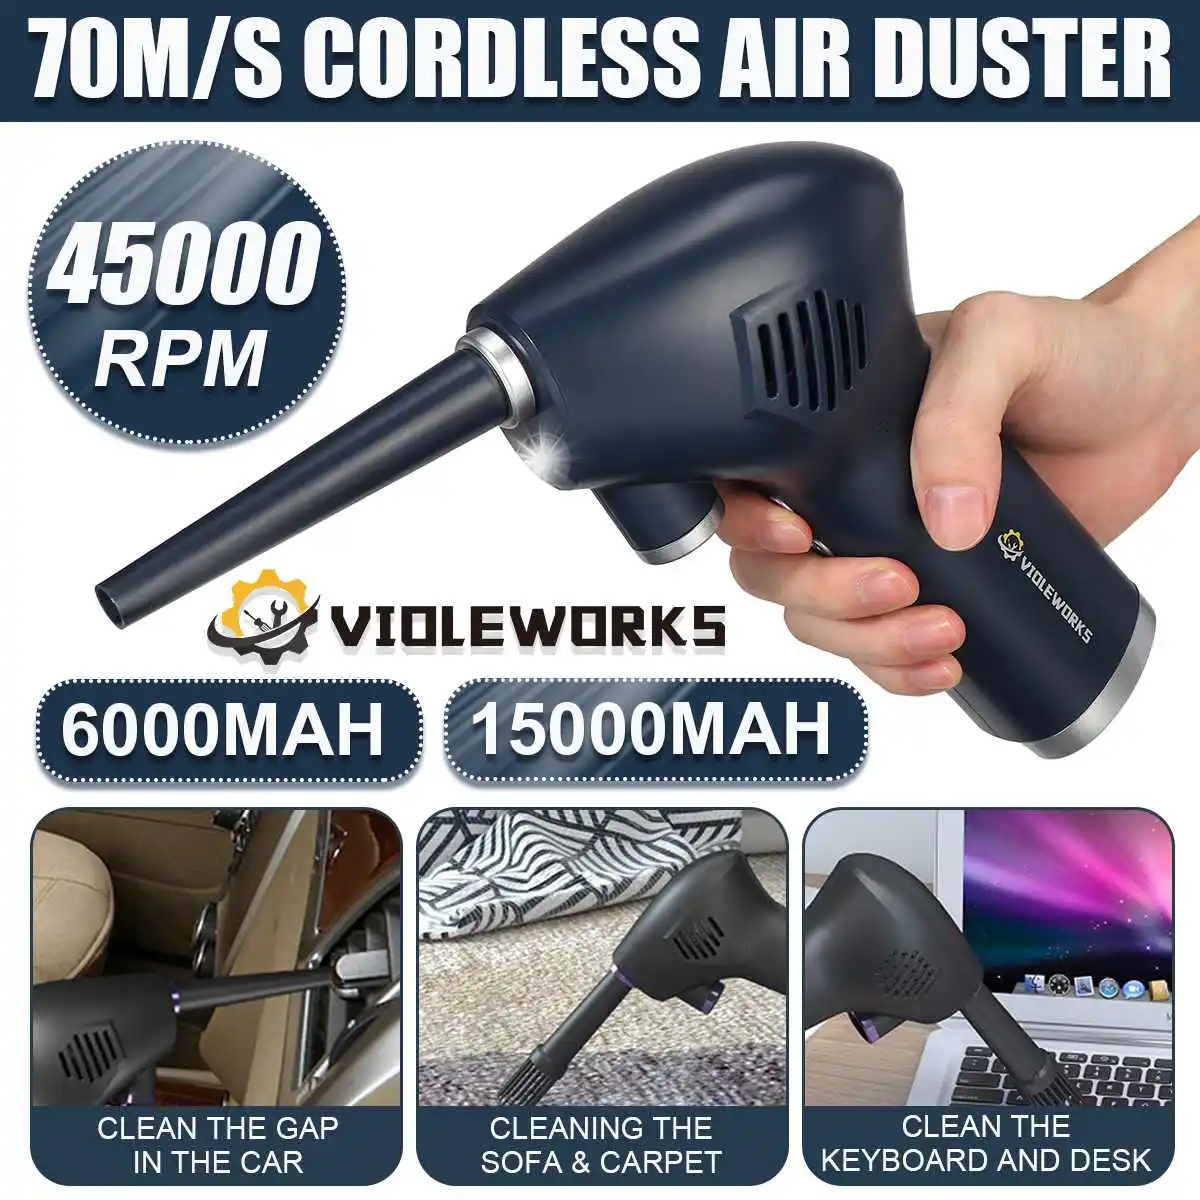 NEW ER 45000RPM Cordless Air Duster Electric Compressed Air Blower For Computer Laptop Keyboard Camera Small Appliances Cleaning